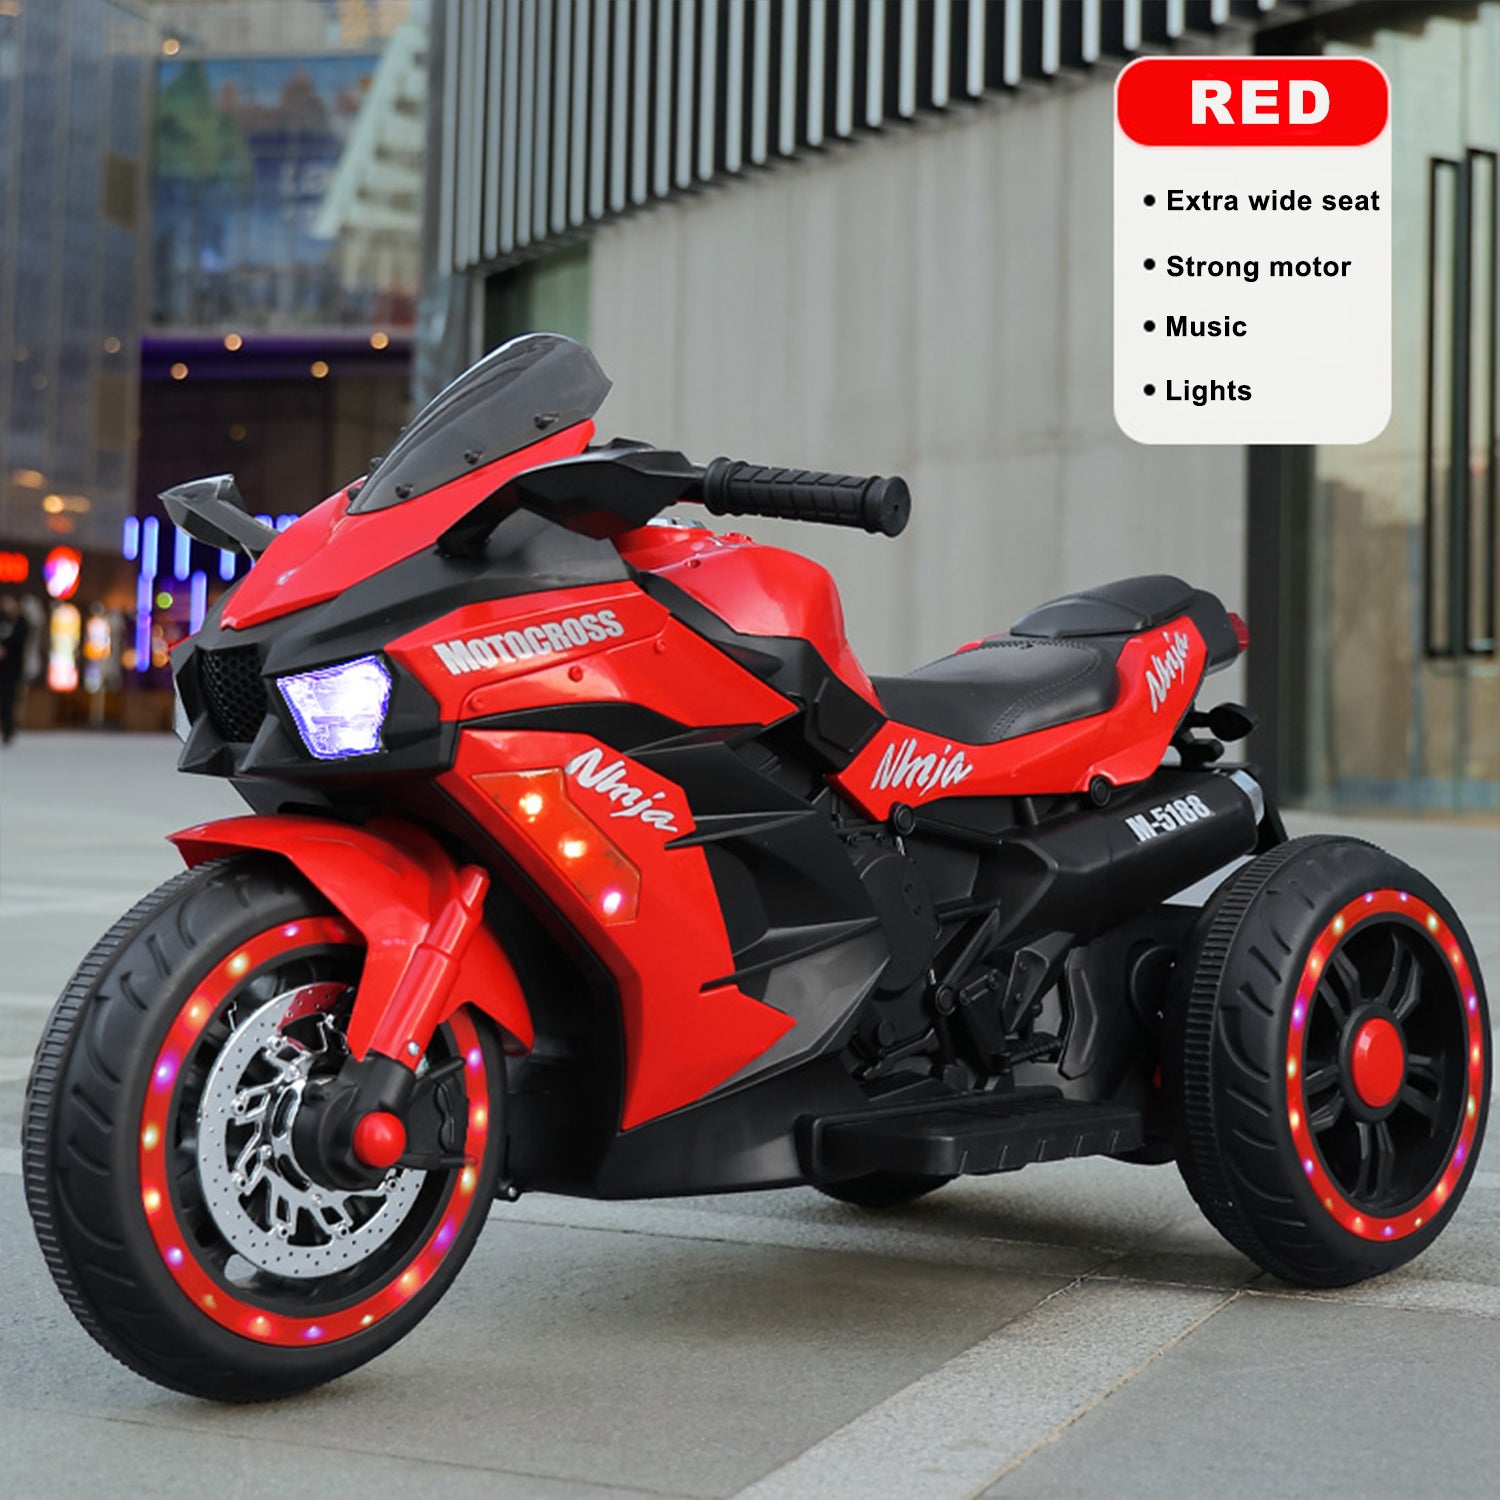 12V Battery Motorcycle, 3Wheel Motorbike Kids Rechargeable Ride On Car Electric Cars Motorcycles--RED MLNshops